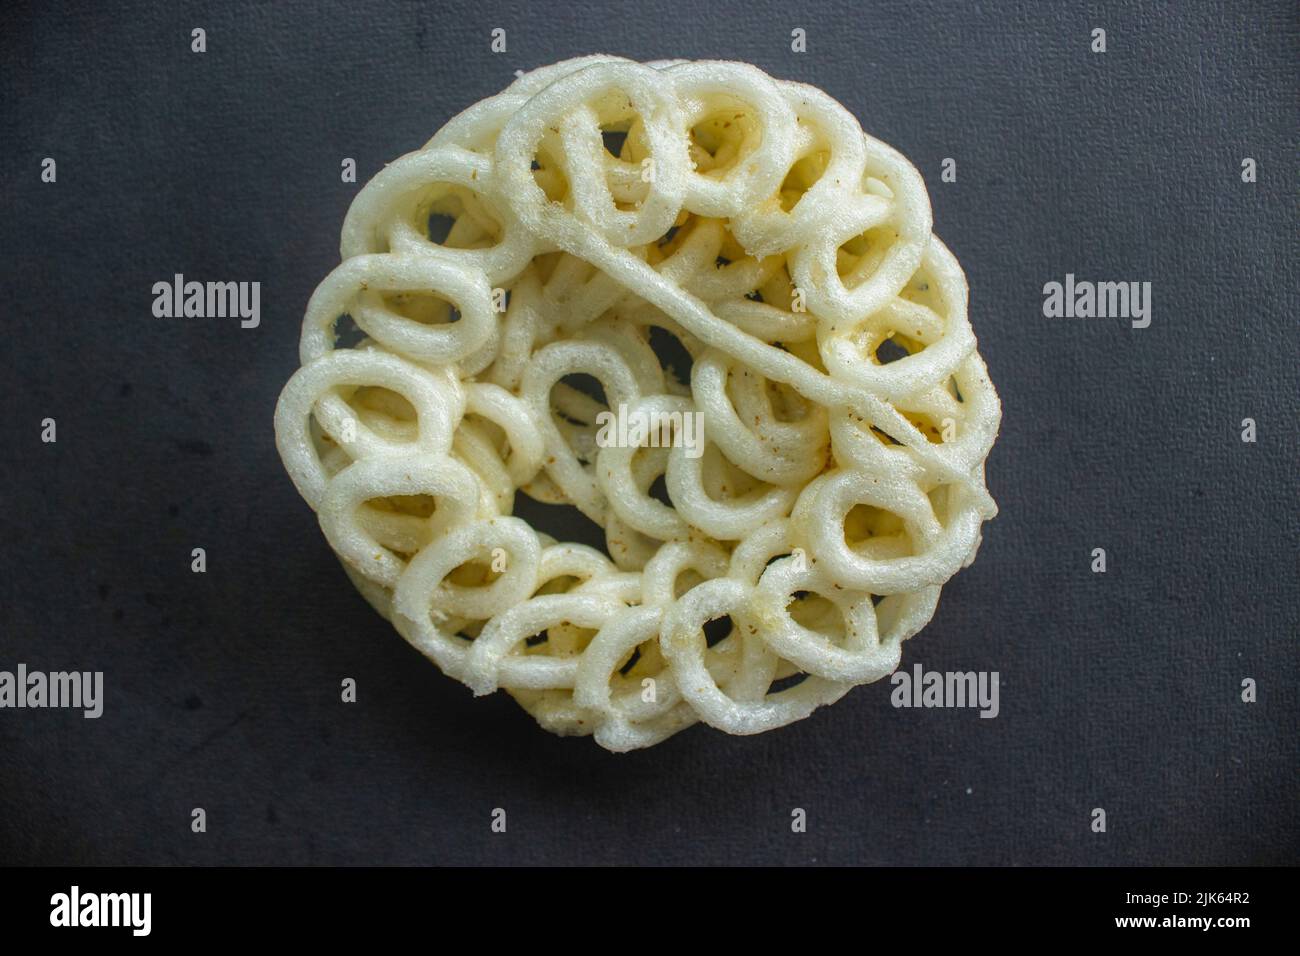 kerupuk or krupuk or crackers isolated on black background. kerupuk is snacks made from tapioca flour dough mixed with flavorings such as shrimp or fi Stock Photo